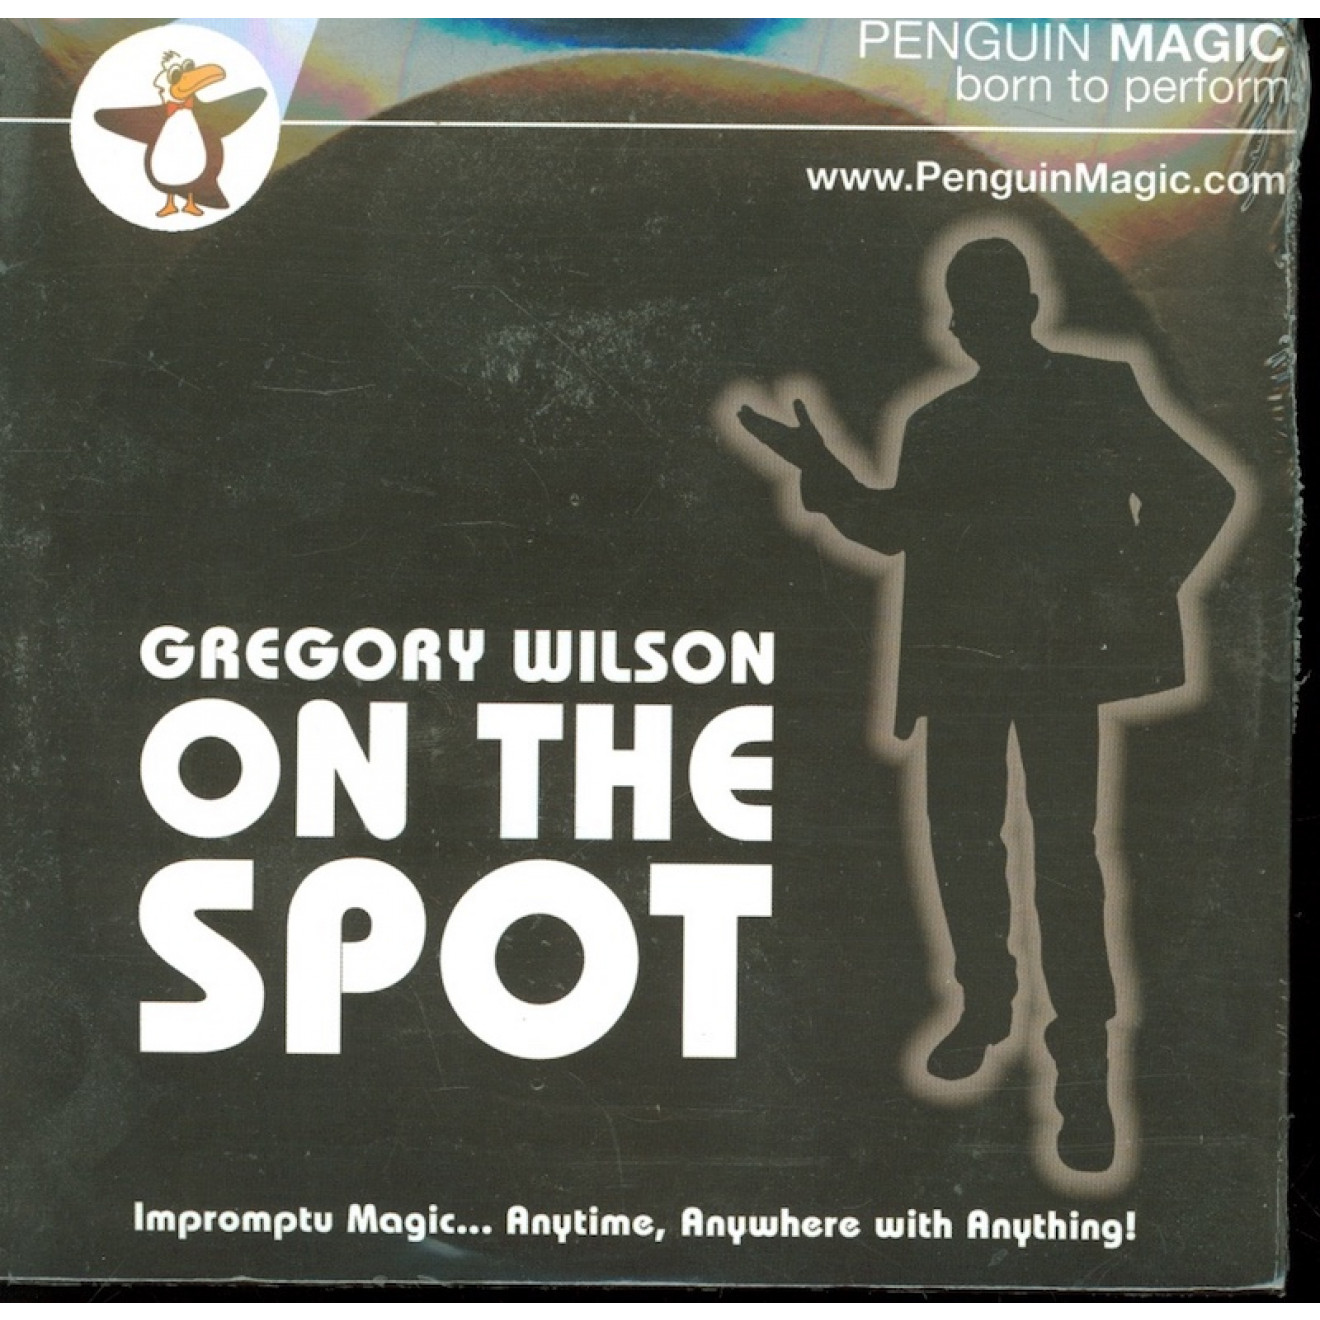 On the Spot with Gregory Wilson (2 Volumes on 1 DVD!